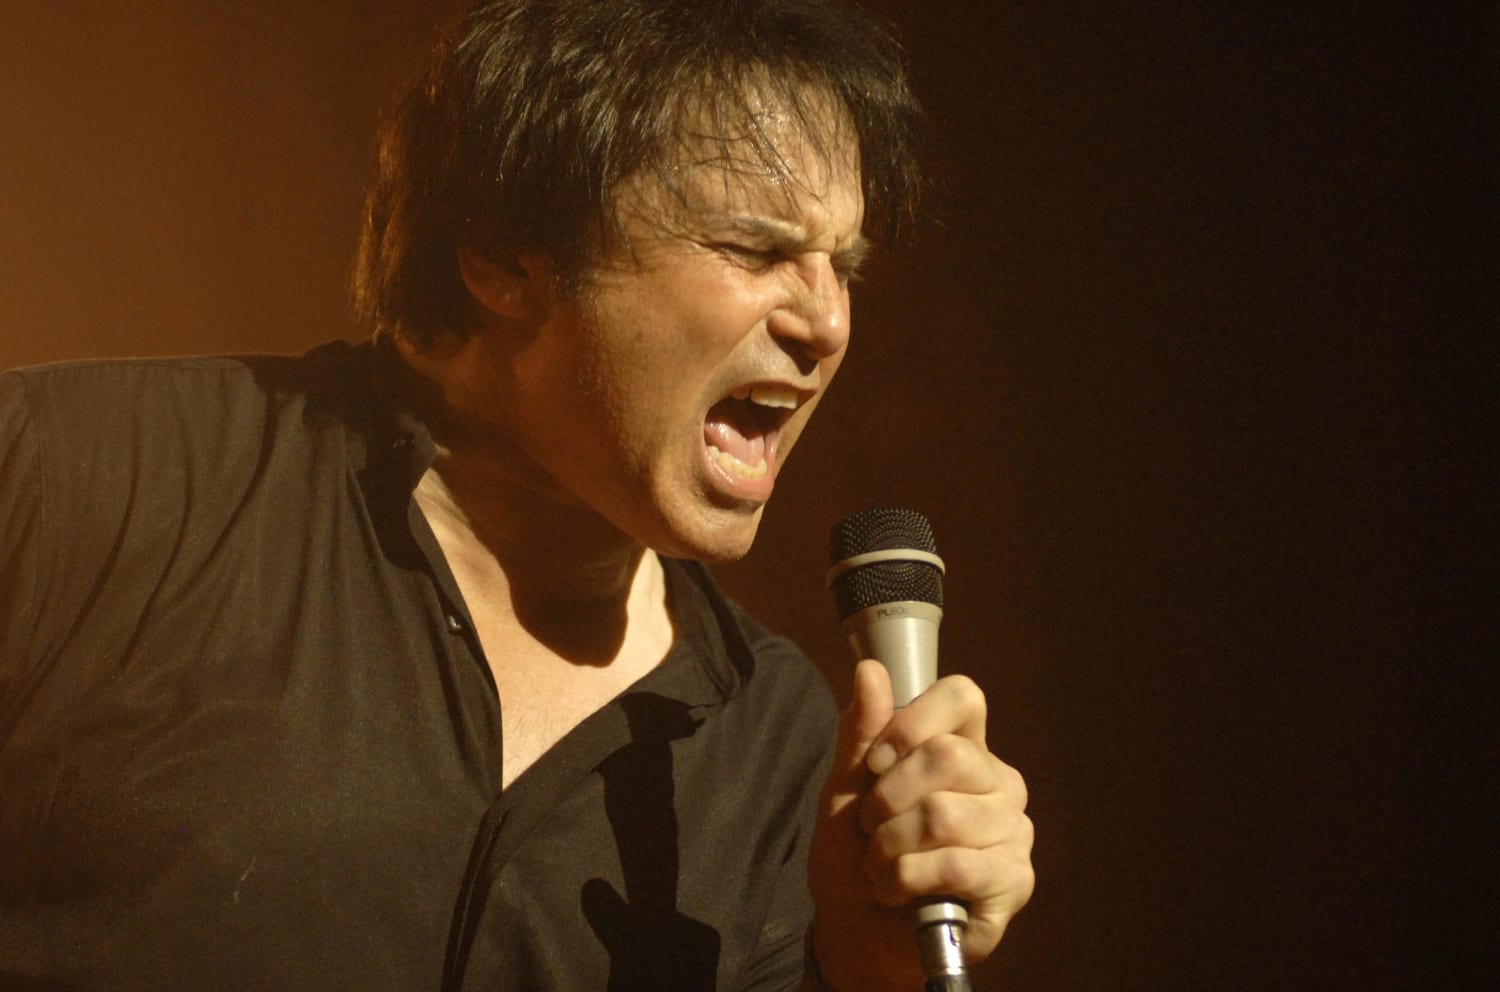 Survivor Band - TBT with Jimi Jamison! What a voice he had